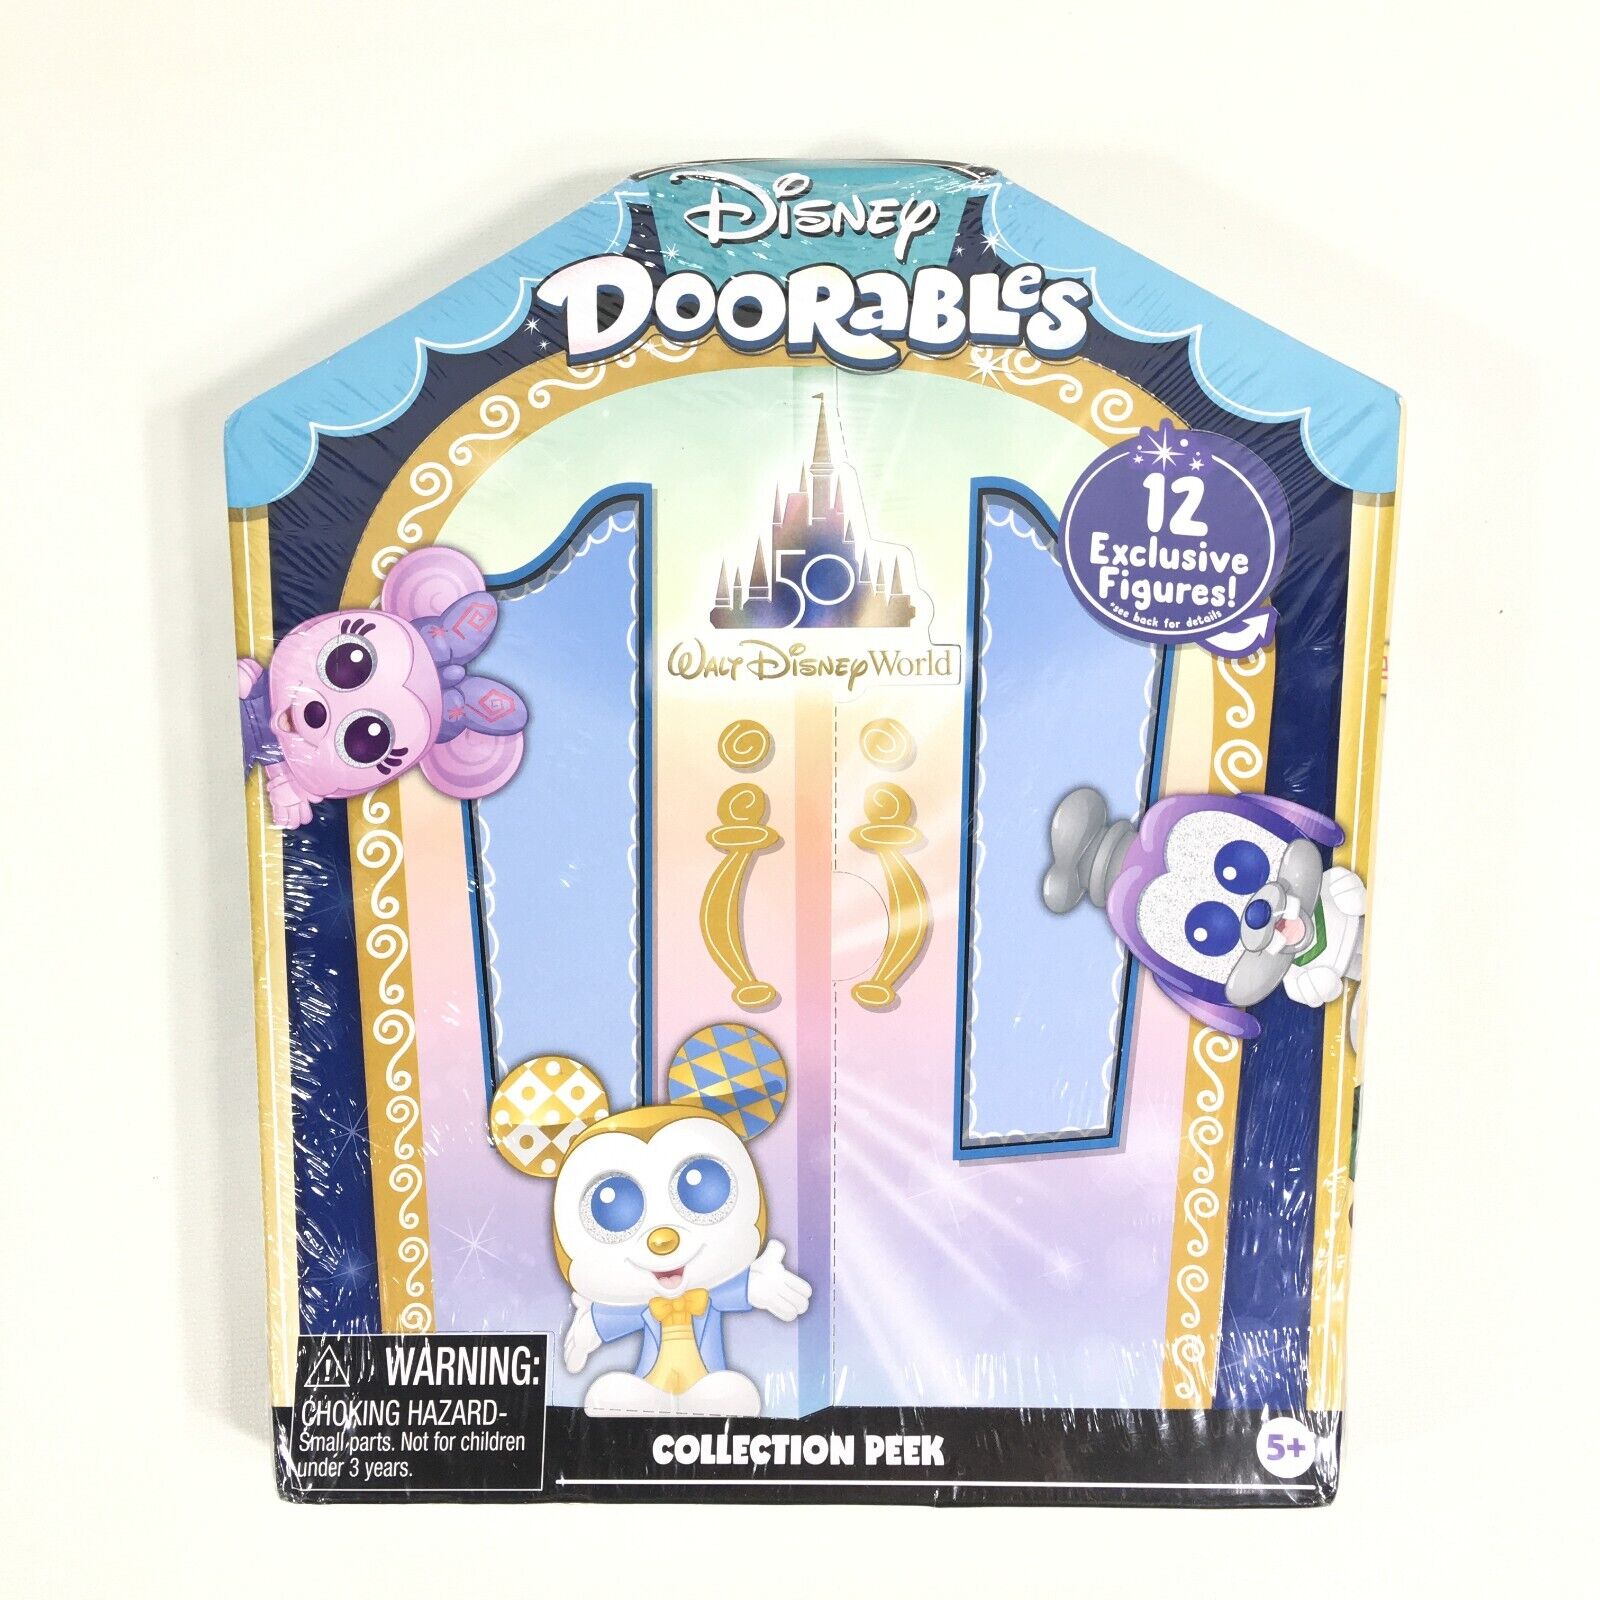 Disney Doorables The Haunted Mansion Collection Peek, Includes 12 Exclusive  Mini Figures, Styles May Vary, Officially Licensed Kids Toys for Ages 5